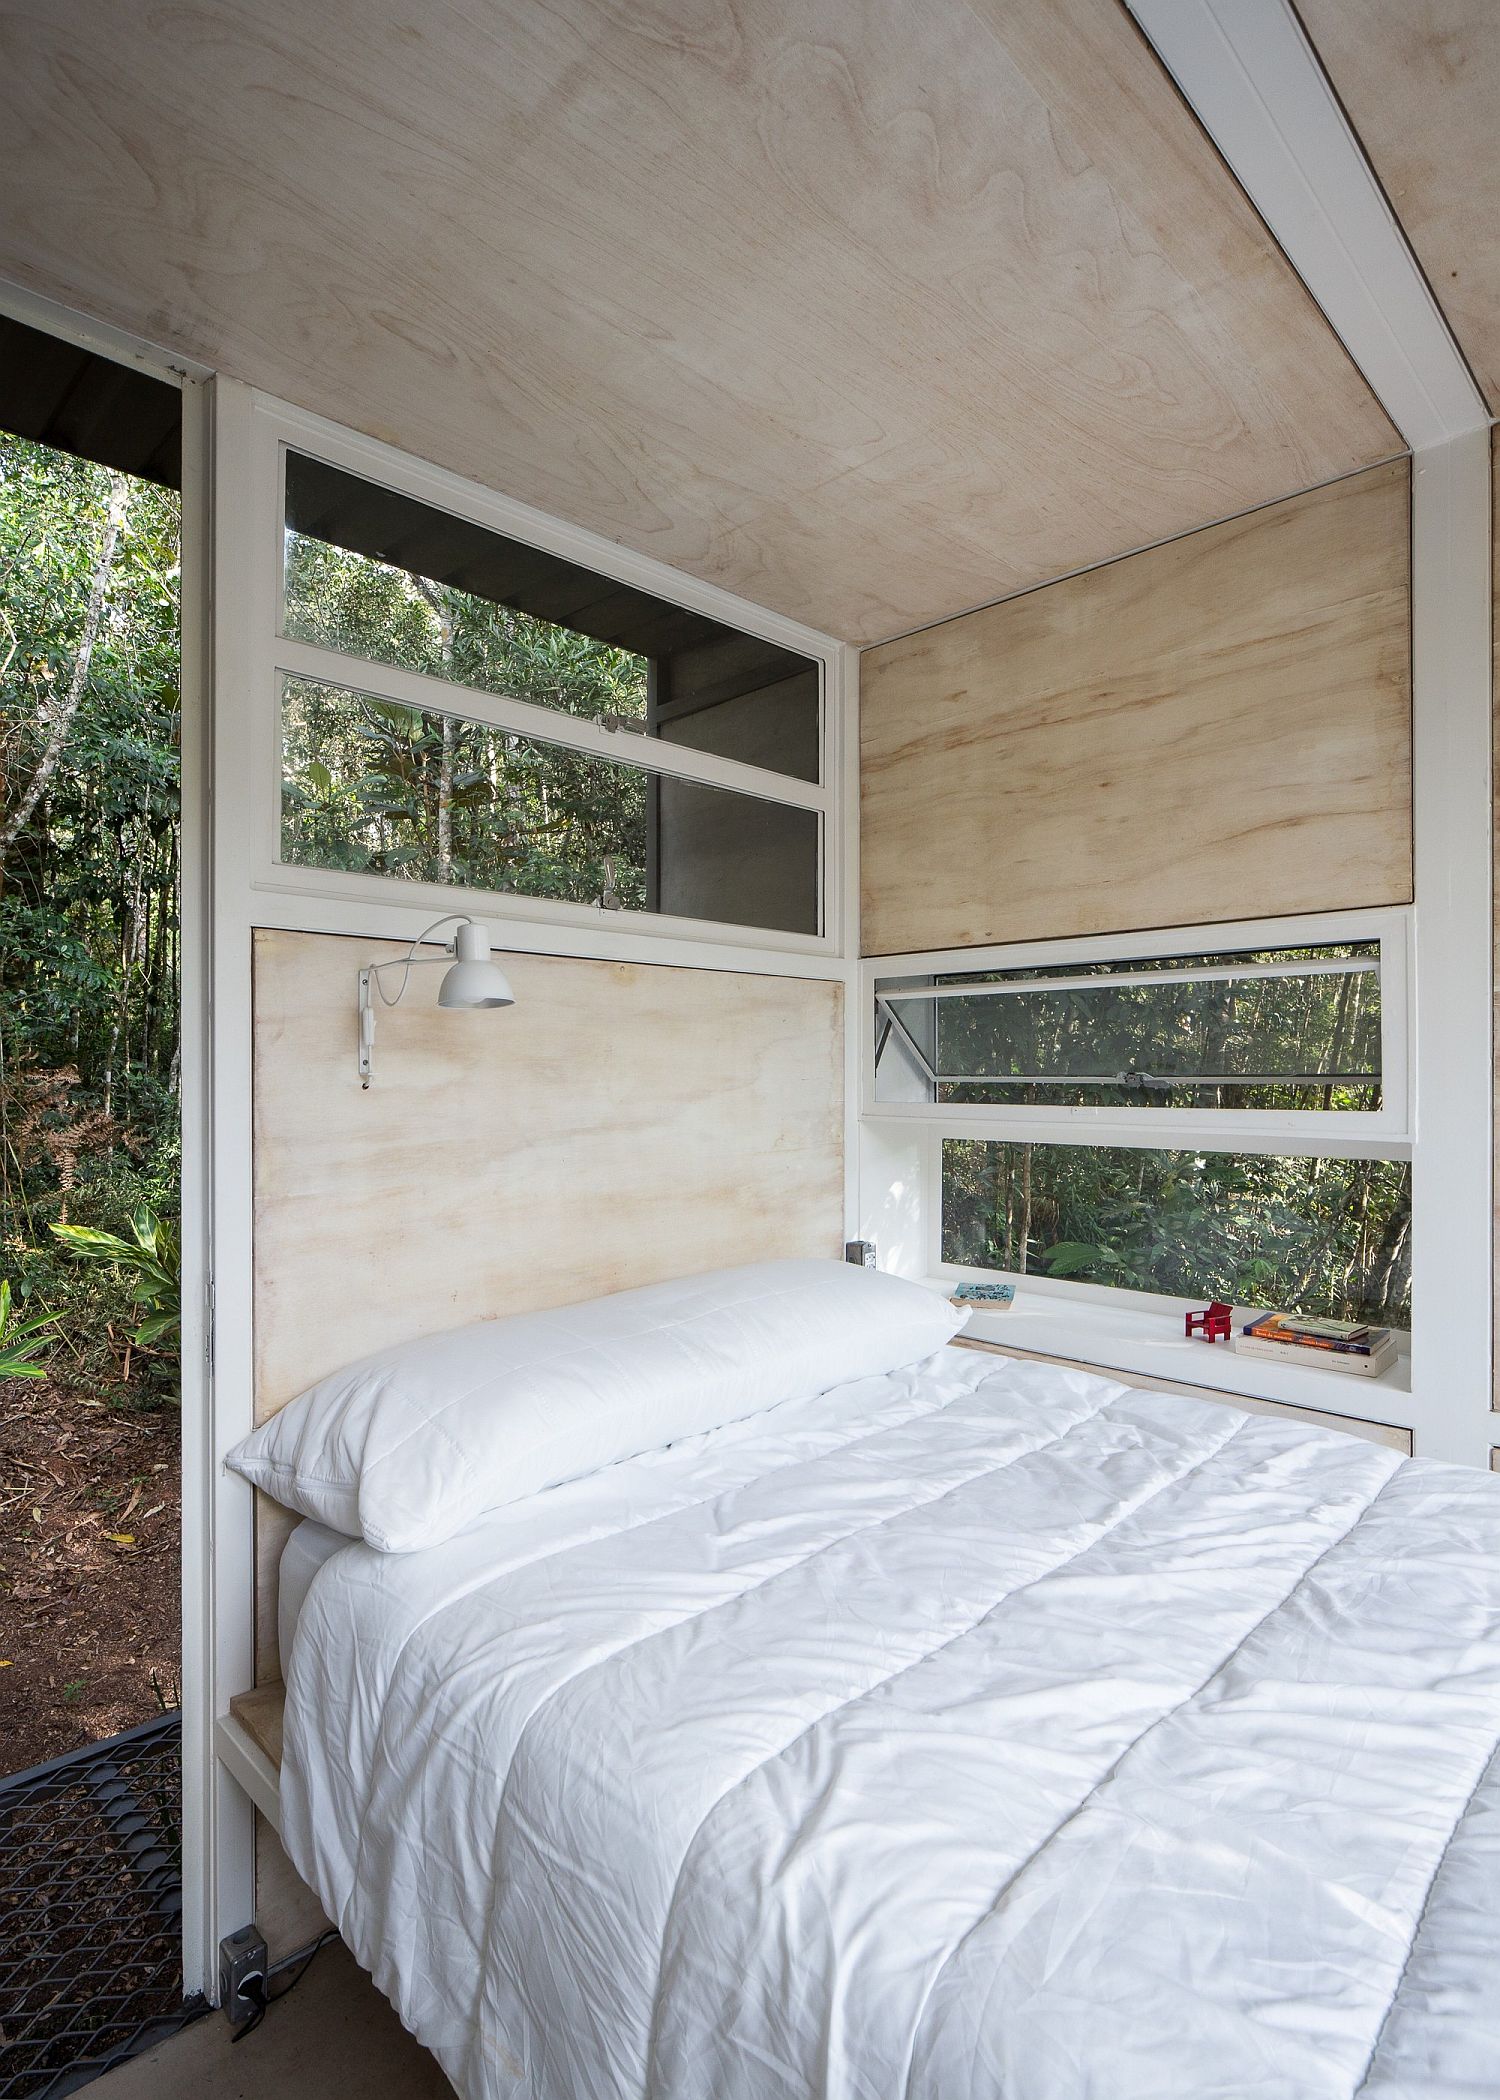 Wooden-panels-improve-the-acoustics-of-the-cabin